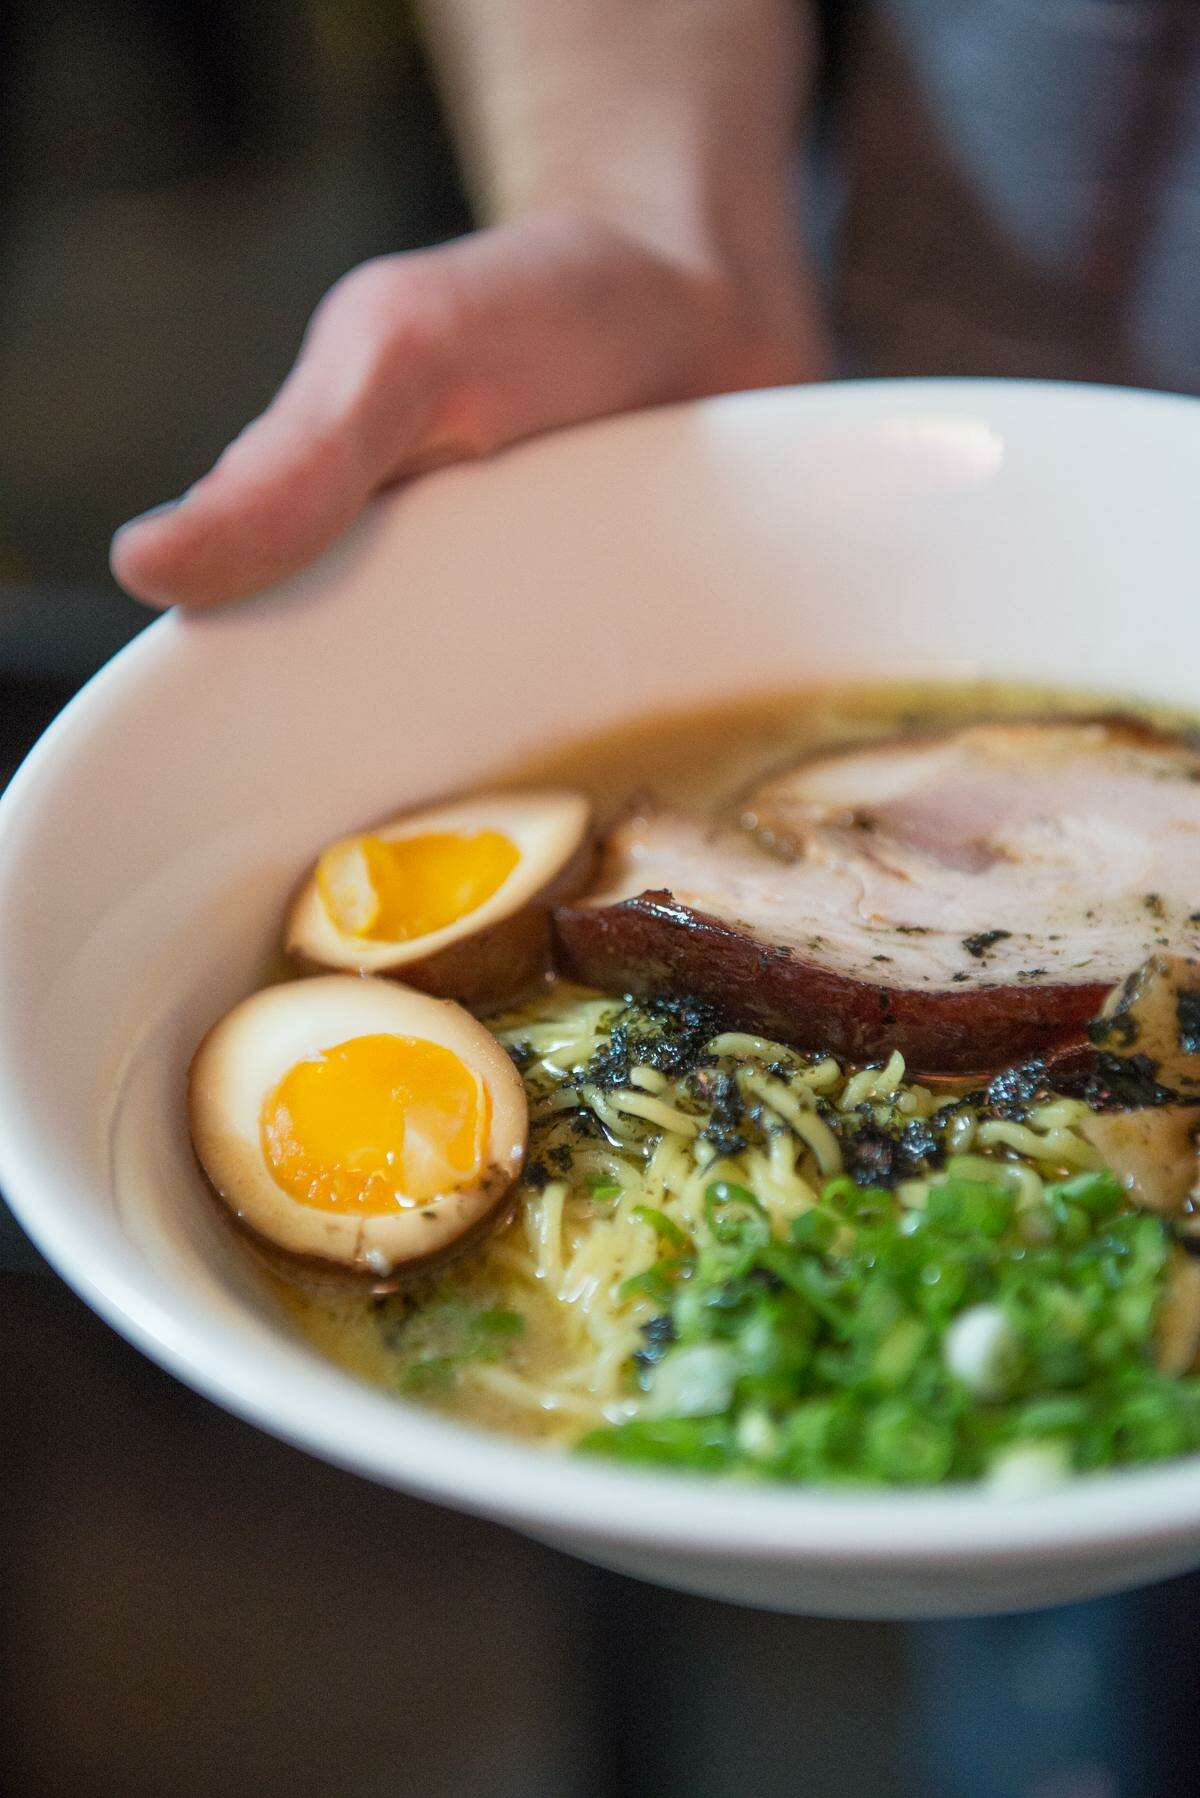 Ramen from a test kitchen/private party featuring Tenko Ramen. Tenko Ramen is one of the vendors going into The Bottling Department, the new food hall at The Pearl scheduled to open in July.